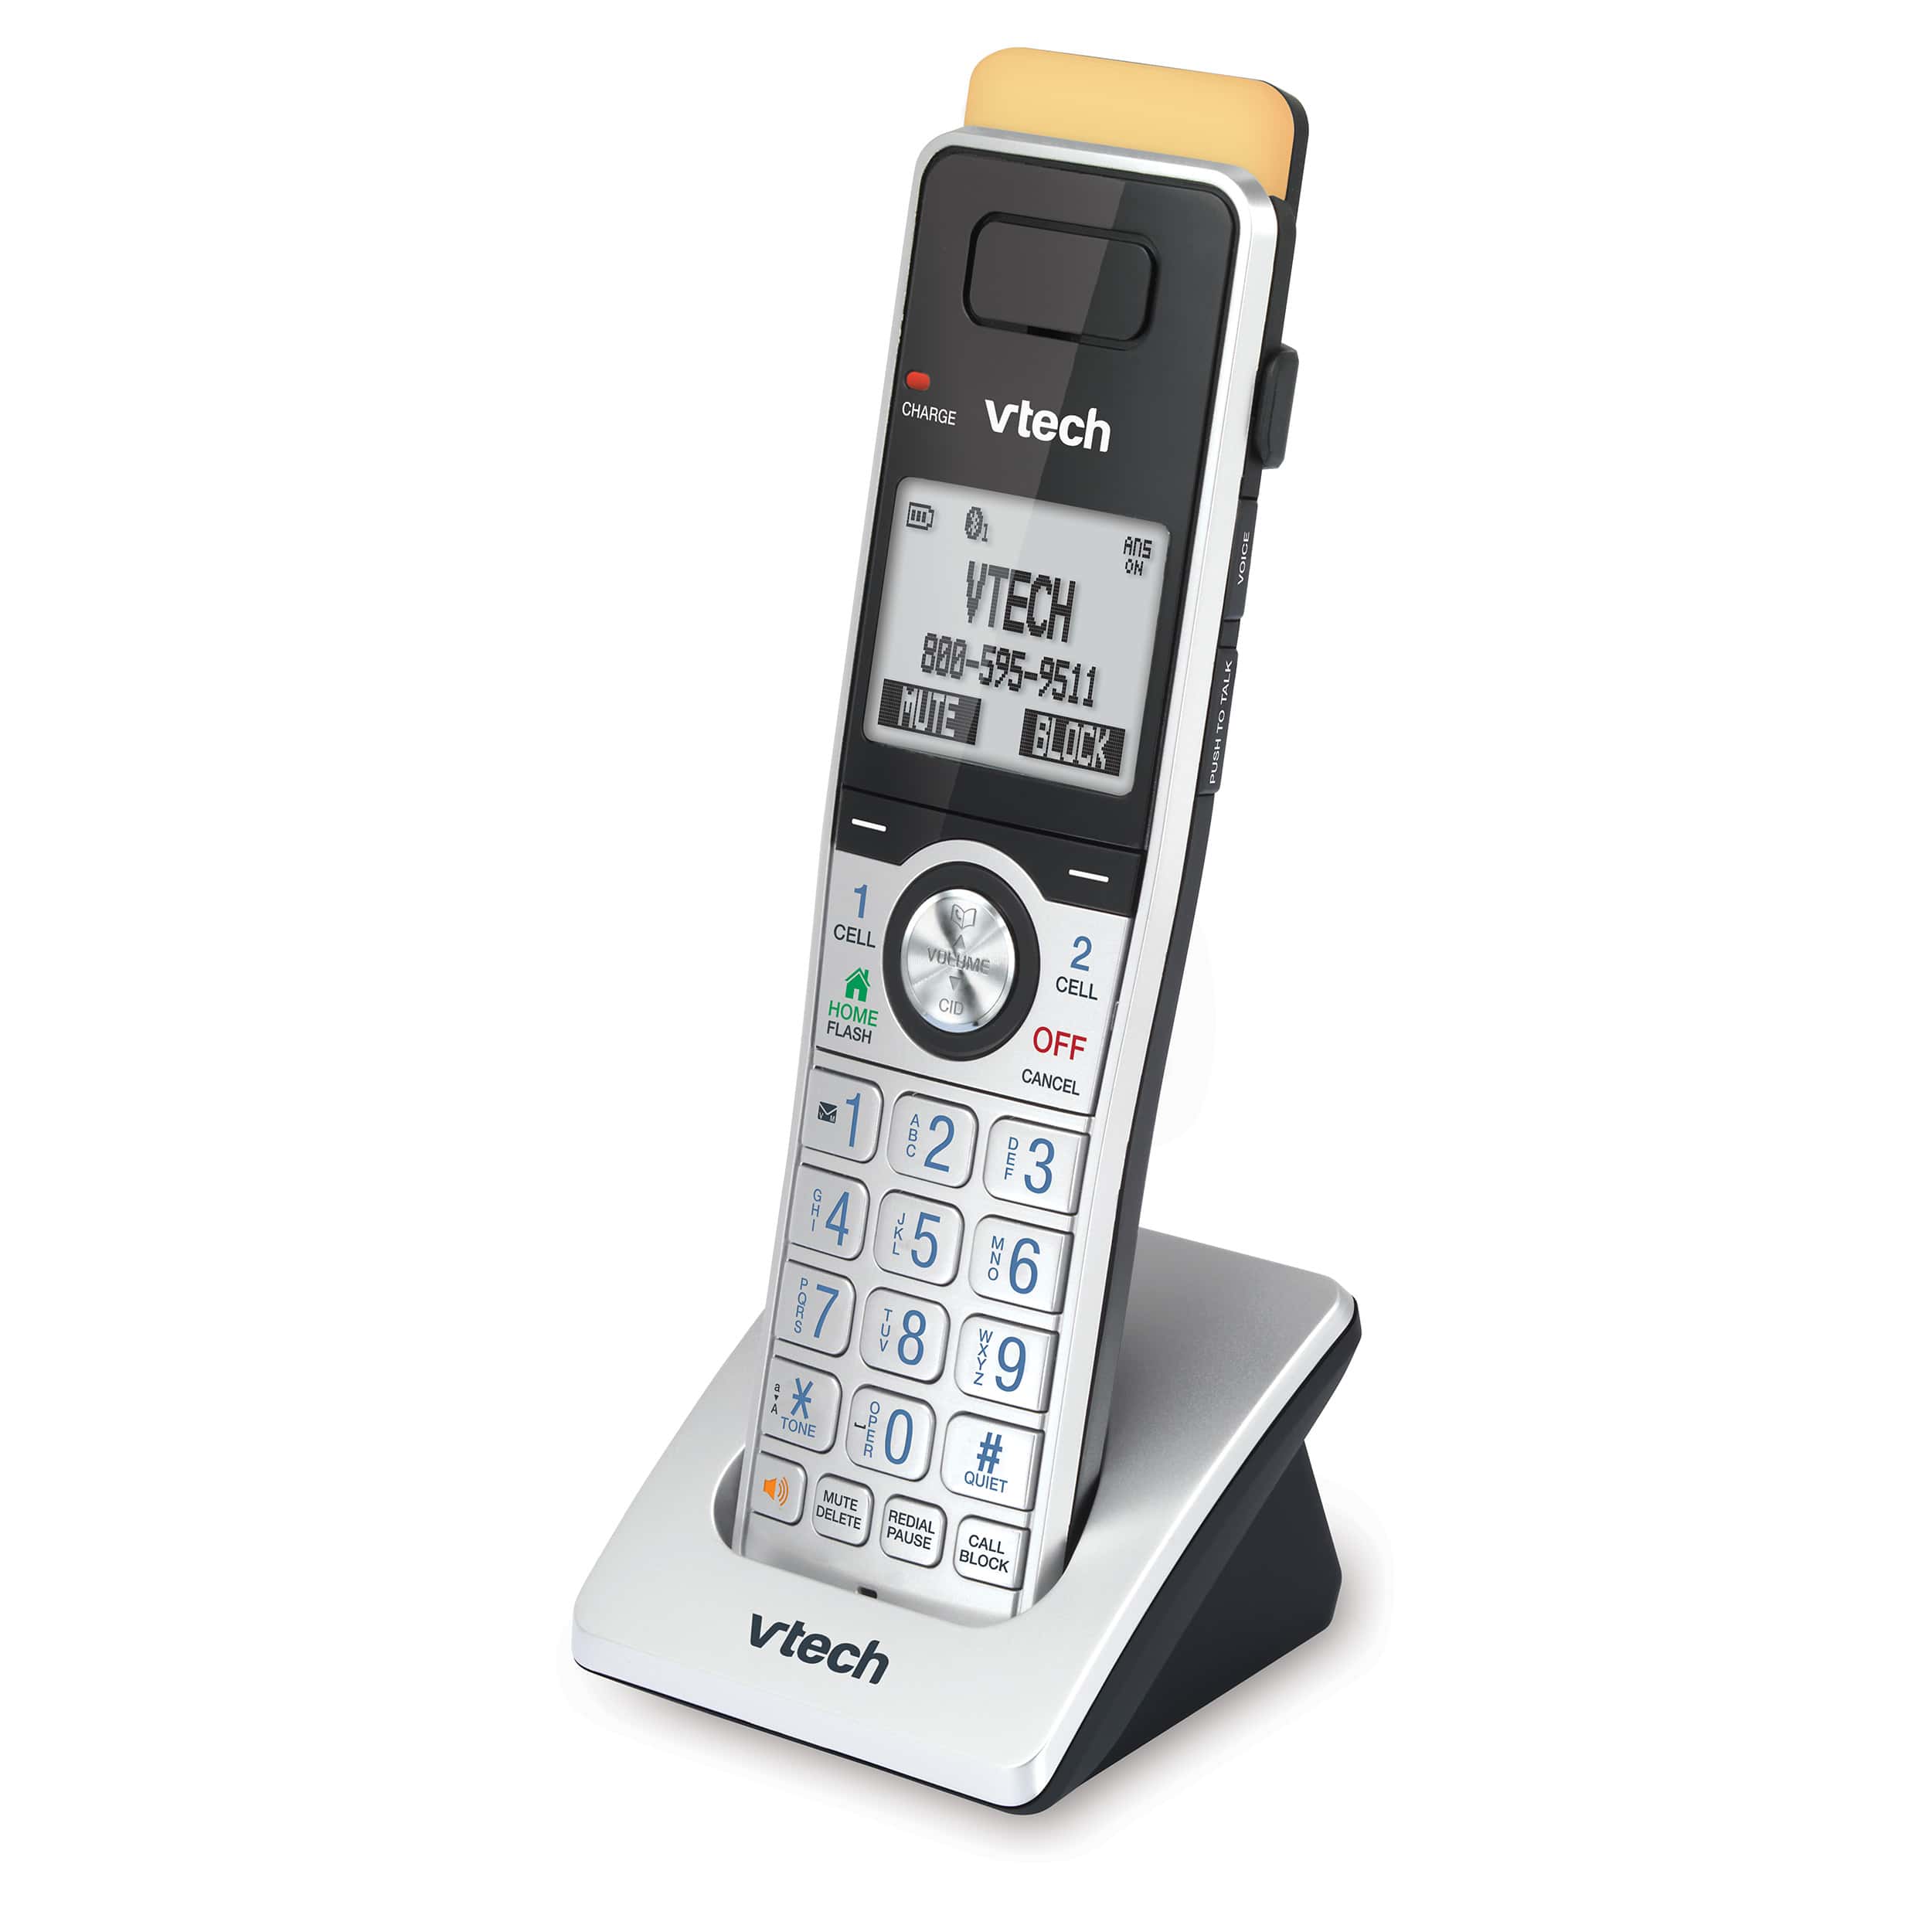 Accessory Handset with Super Long Range, Bluetooth Connect to Cell, and Smart Call Blocker - view 1